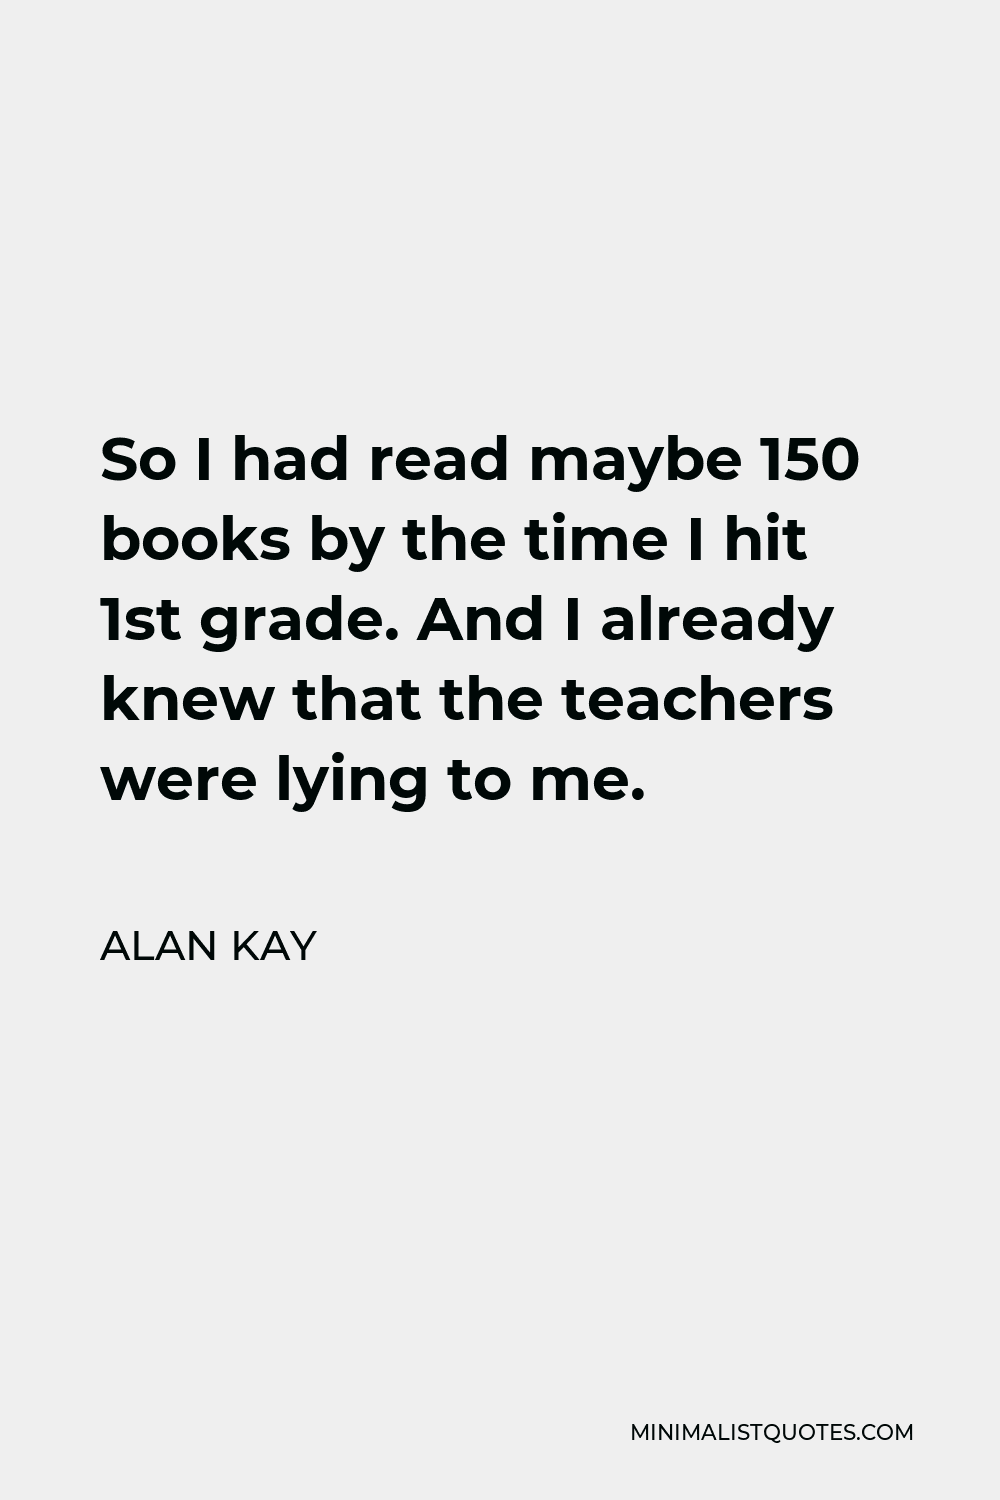 Alan Kay Quote - So I had read maybe 150 books by the time I hit 1st grade. And I already knew that the teachers were lying to me.